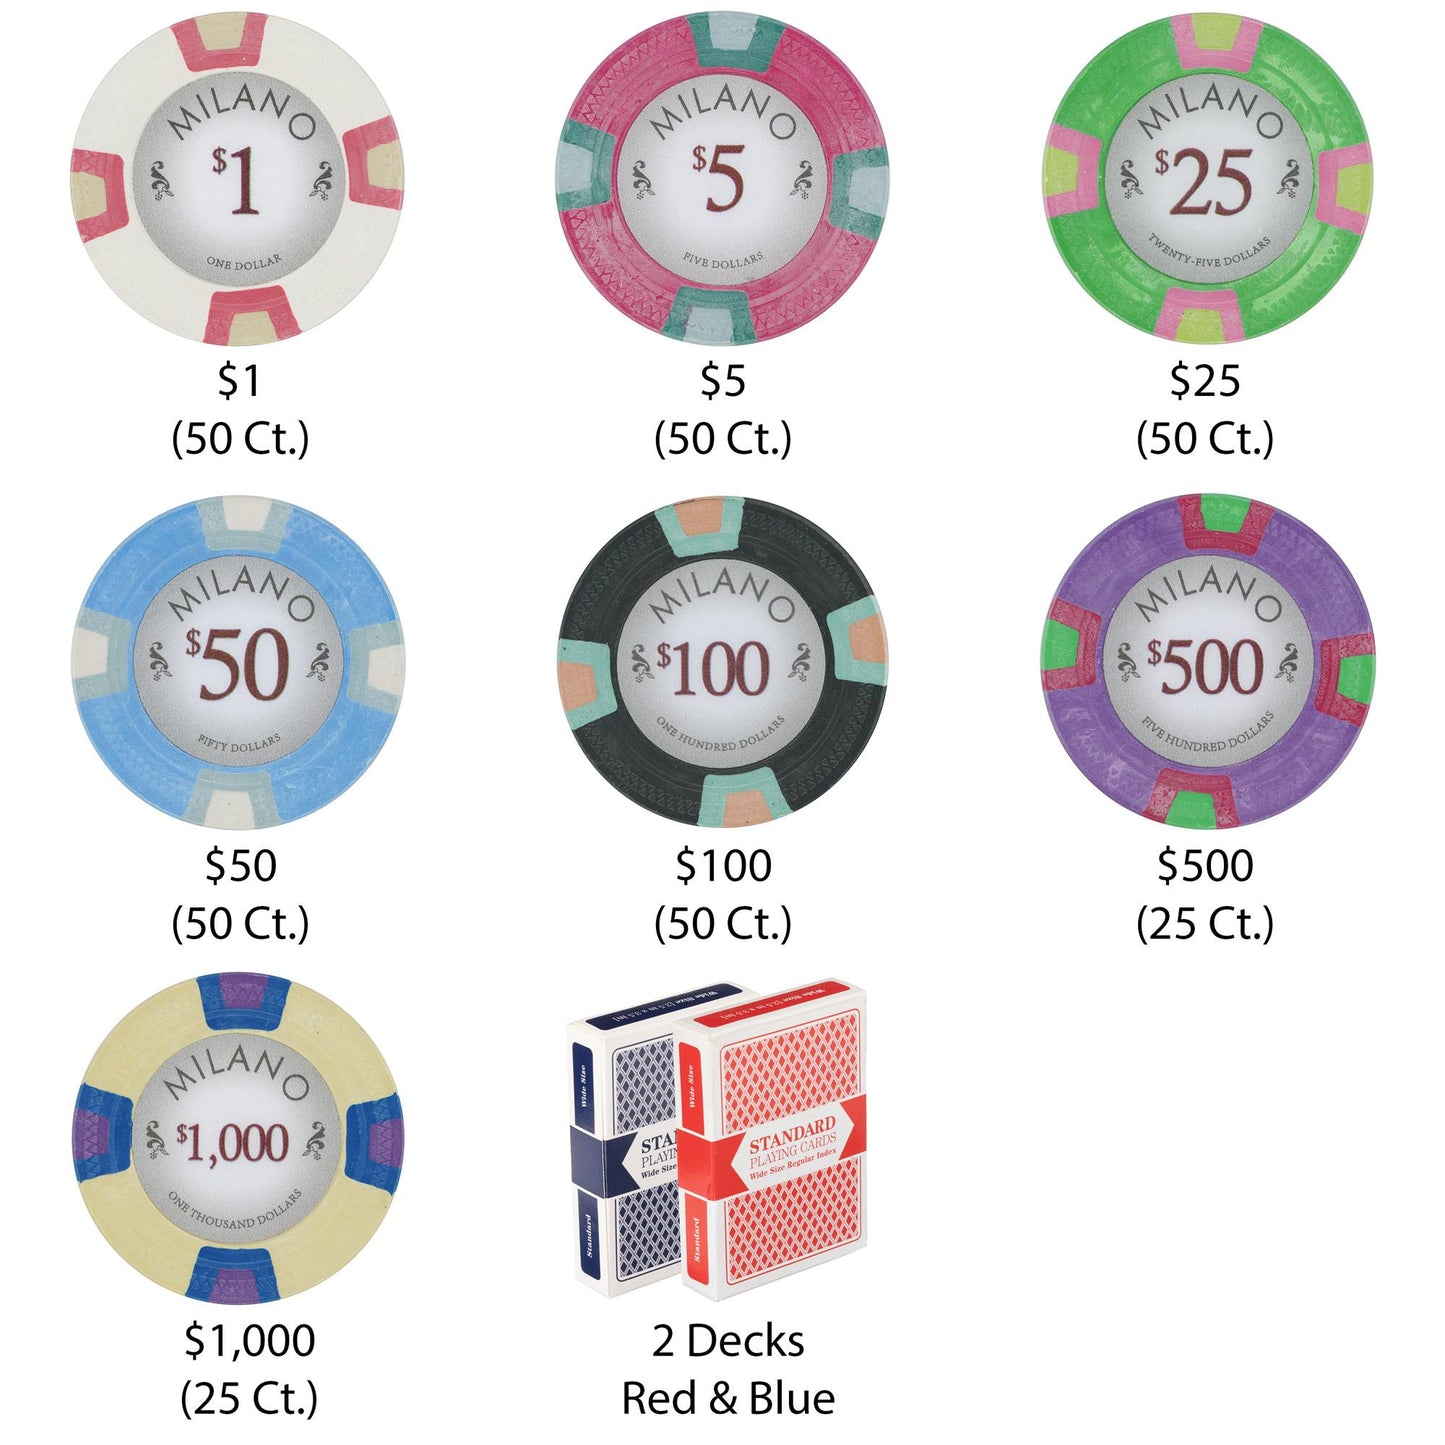 300 Milano Poker Chips with Wooden Carousel